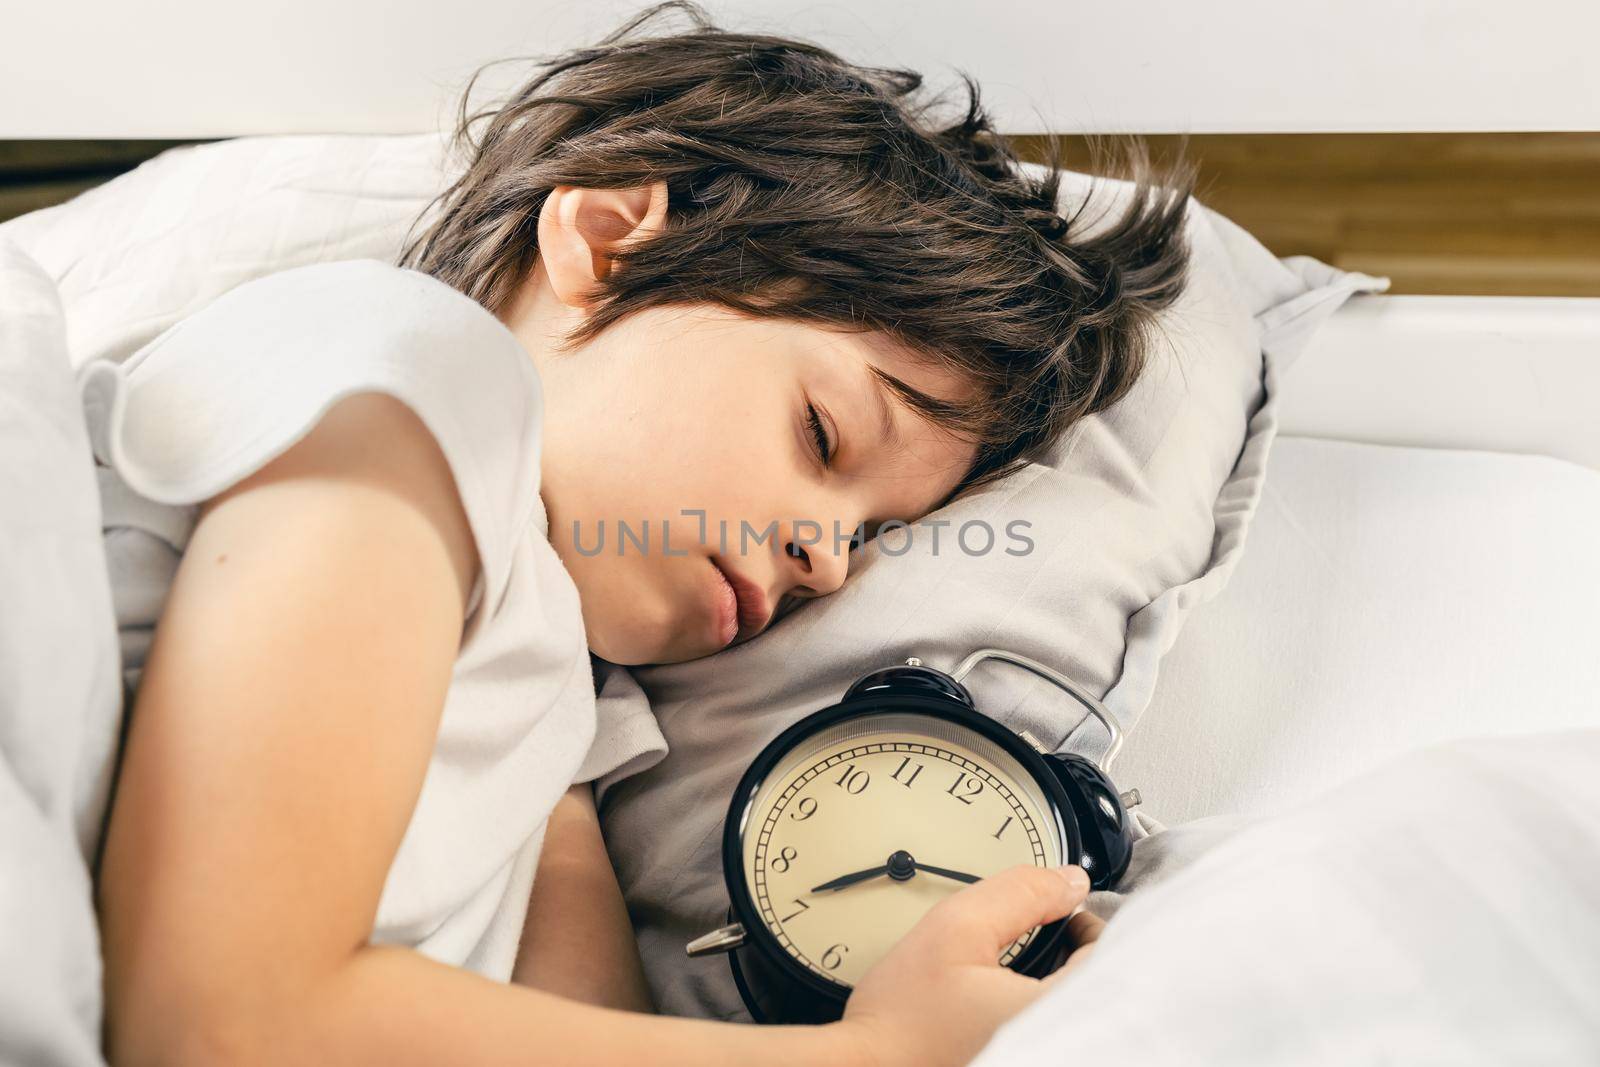 Boy sleeping peacefully and holding an alarm clock by Syvanych